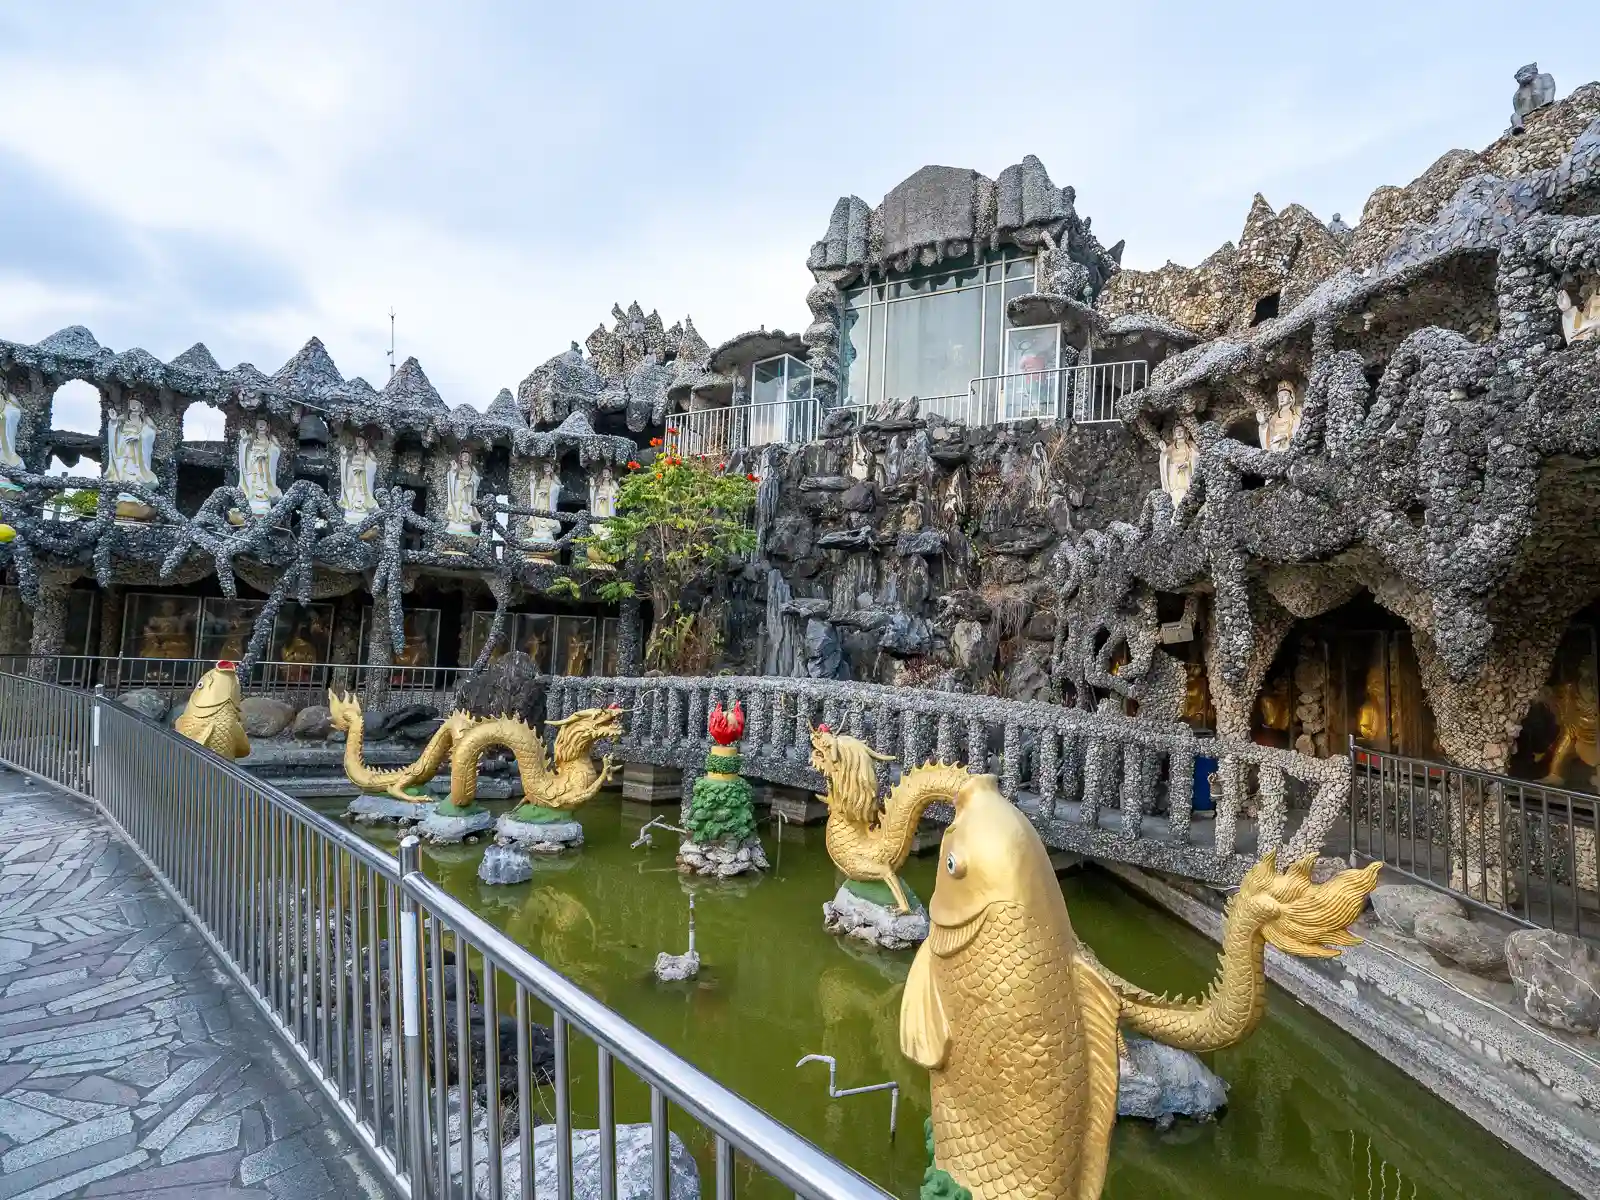 Golden fish and dragon statues decorate the pond at the center of the temple.